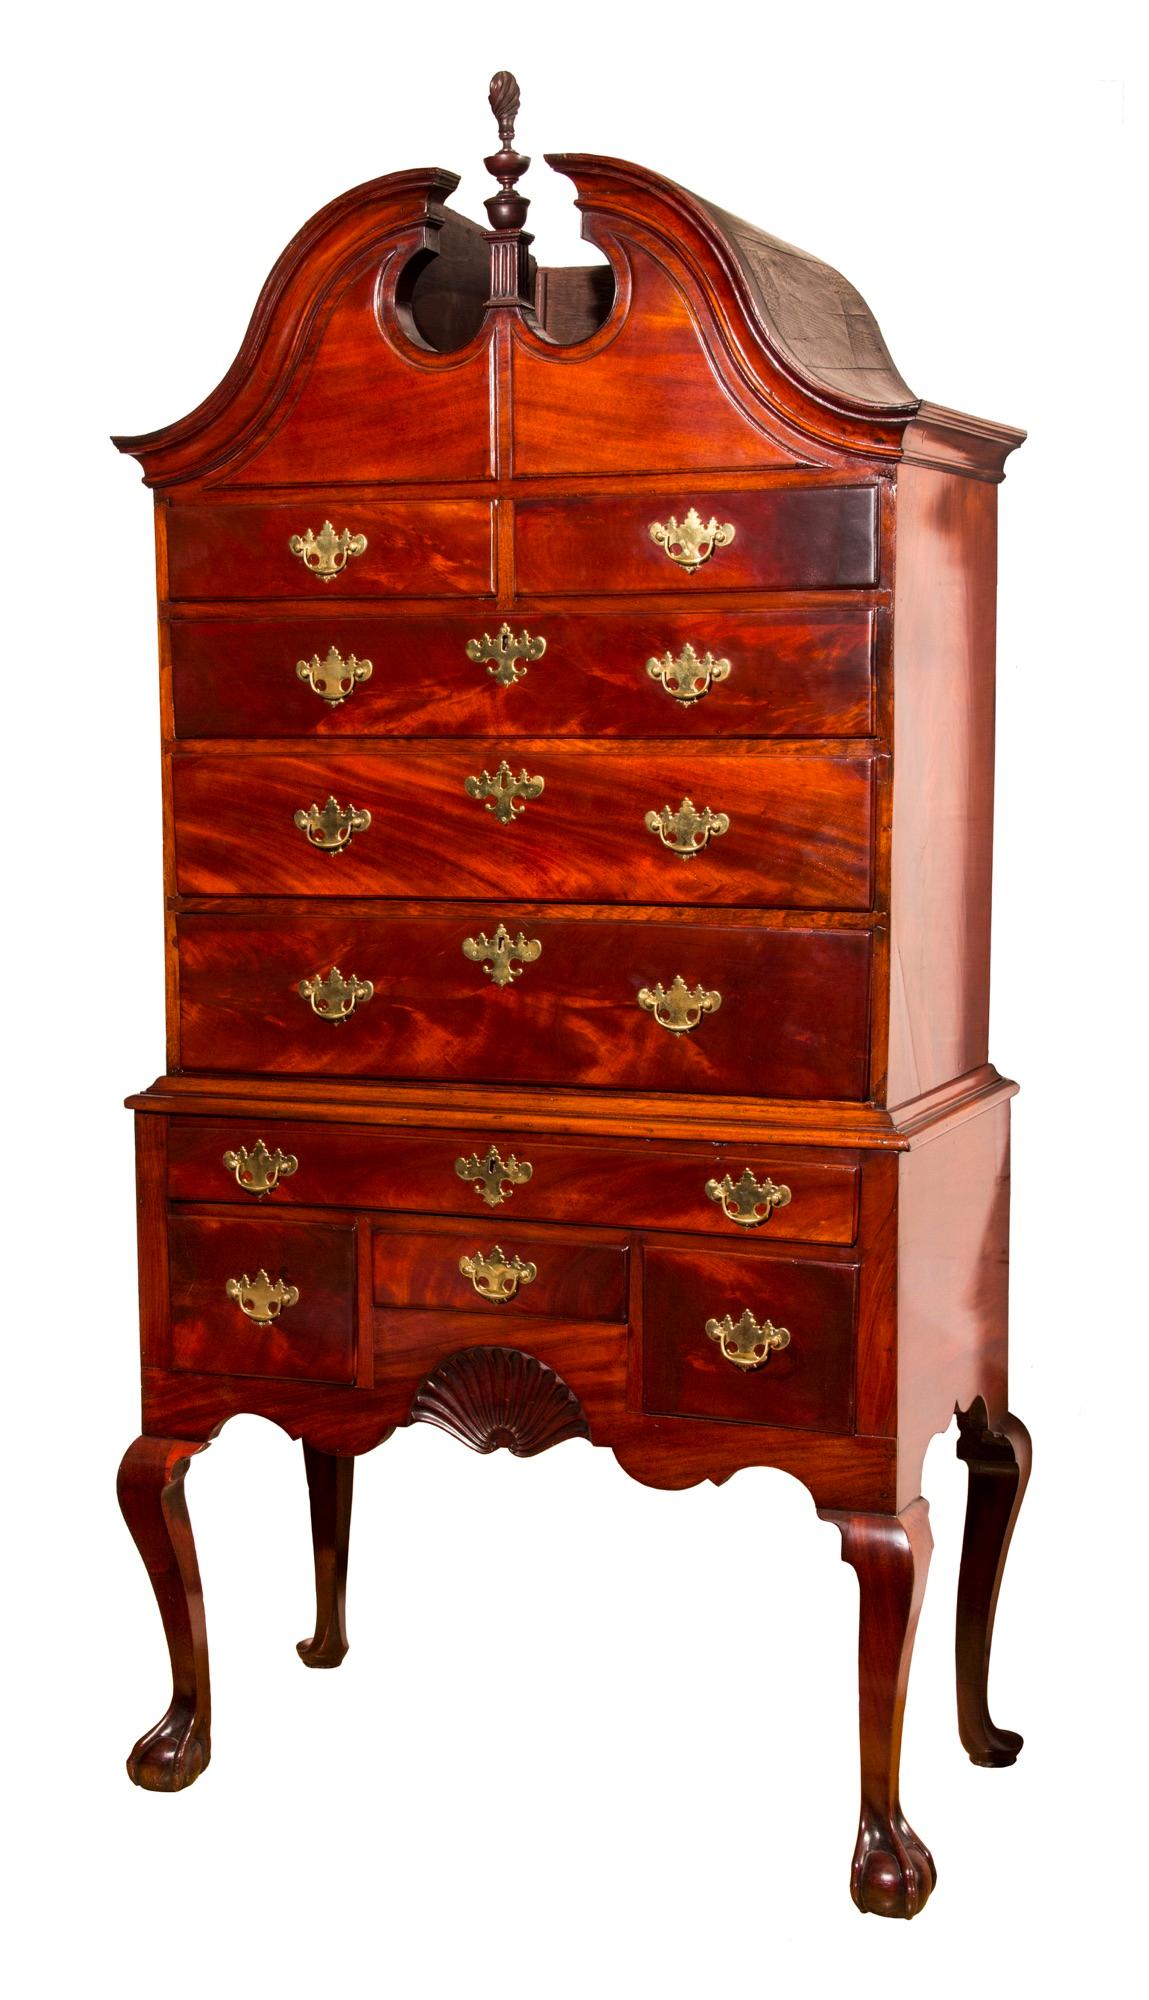 An early Chippendale mahogany bonnet-top highboy, with original finial, by the Townsend/Goddard School of Cabinetmakers, Newport, Rhode Island, circa 1765.Provenance: Descended through the John Olney family

Referenced: Yale University Rhode